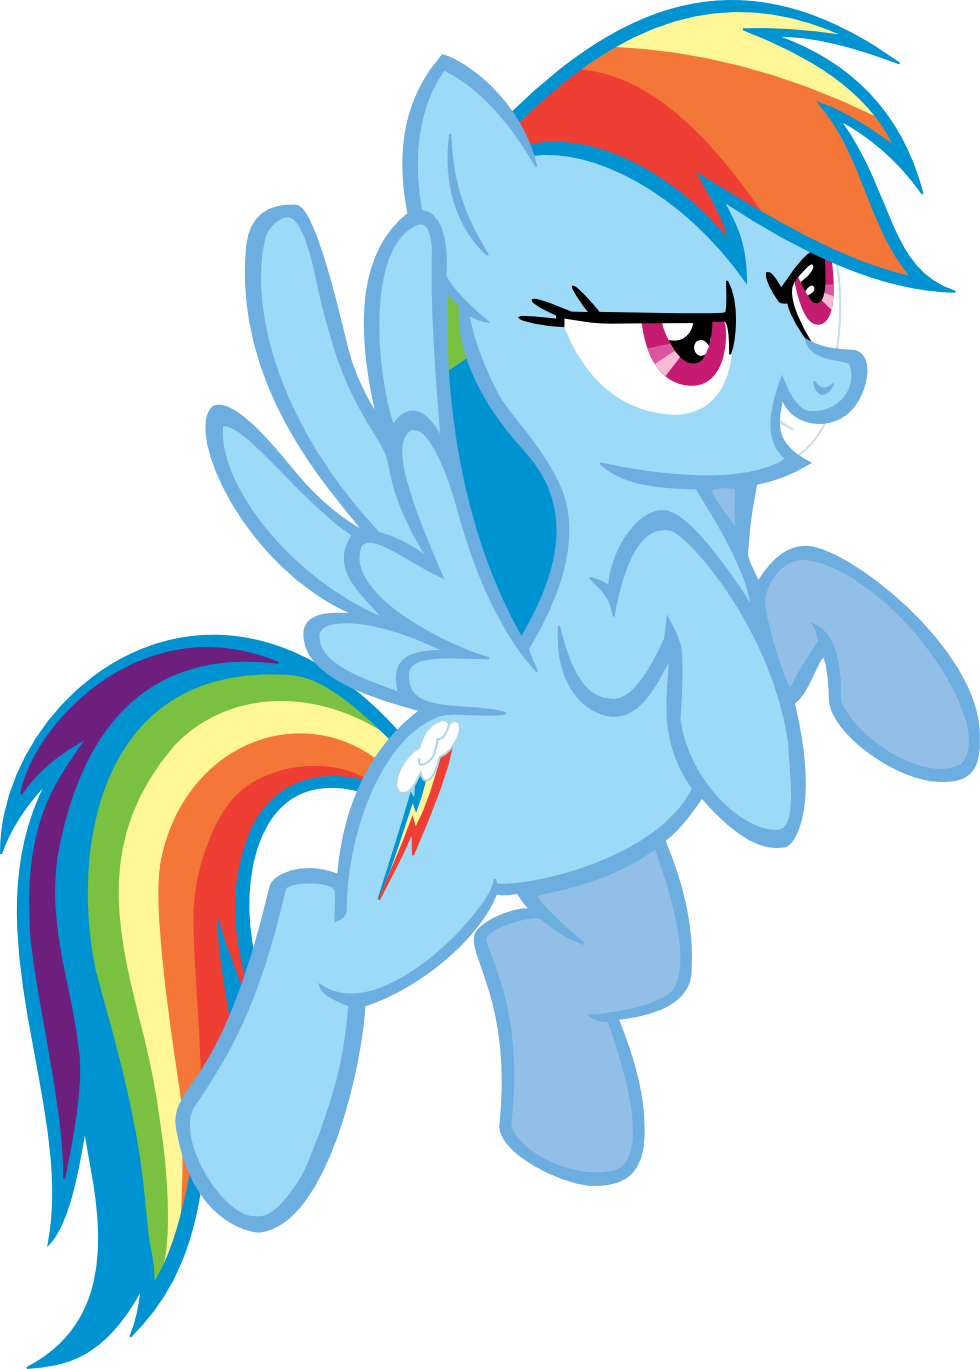 In Would Fly Rainbow Dash By Frezarion-d42bb96 - My Little Pony Rainbow Dash Flying (980x1369)